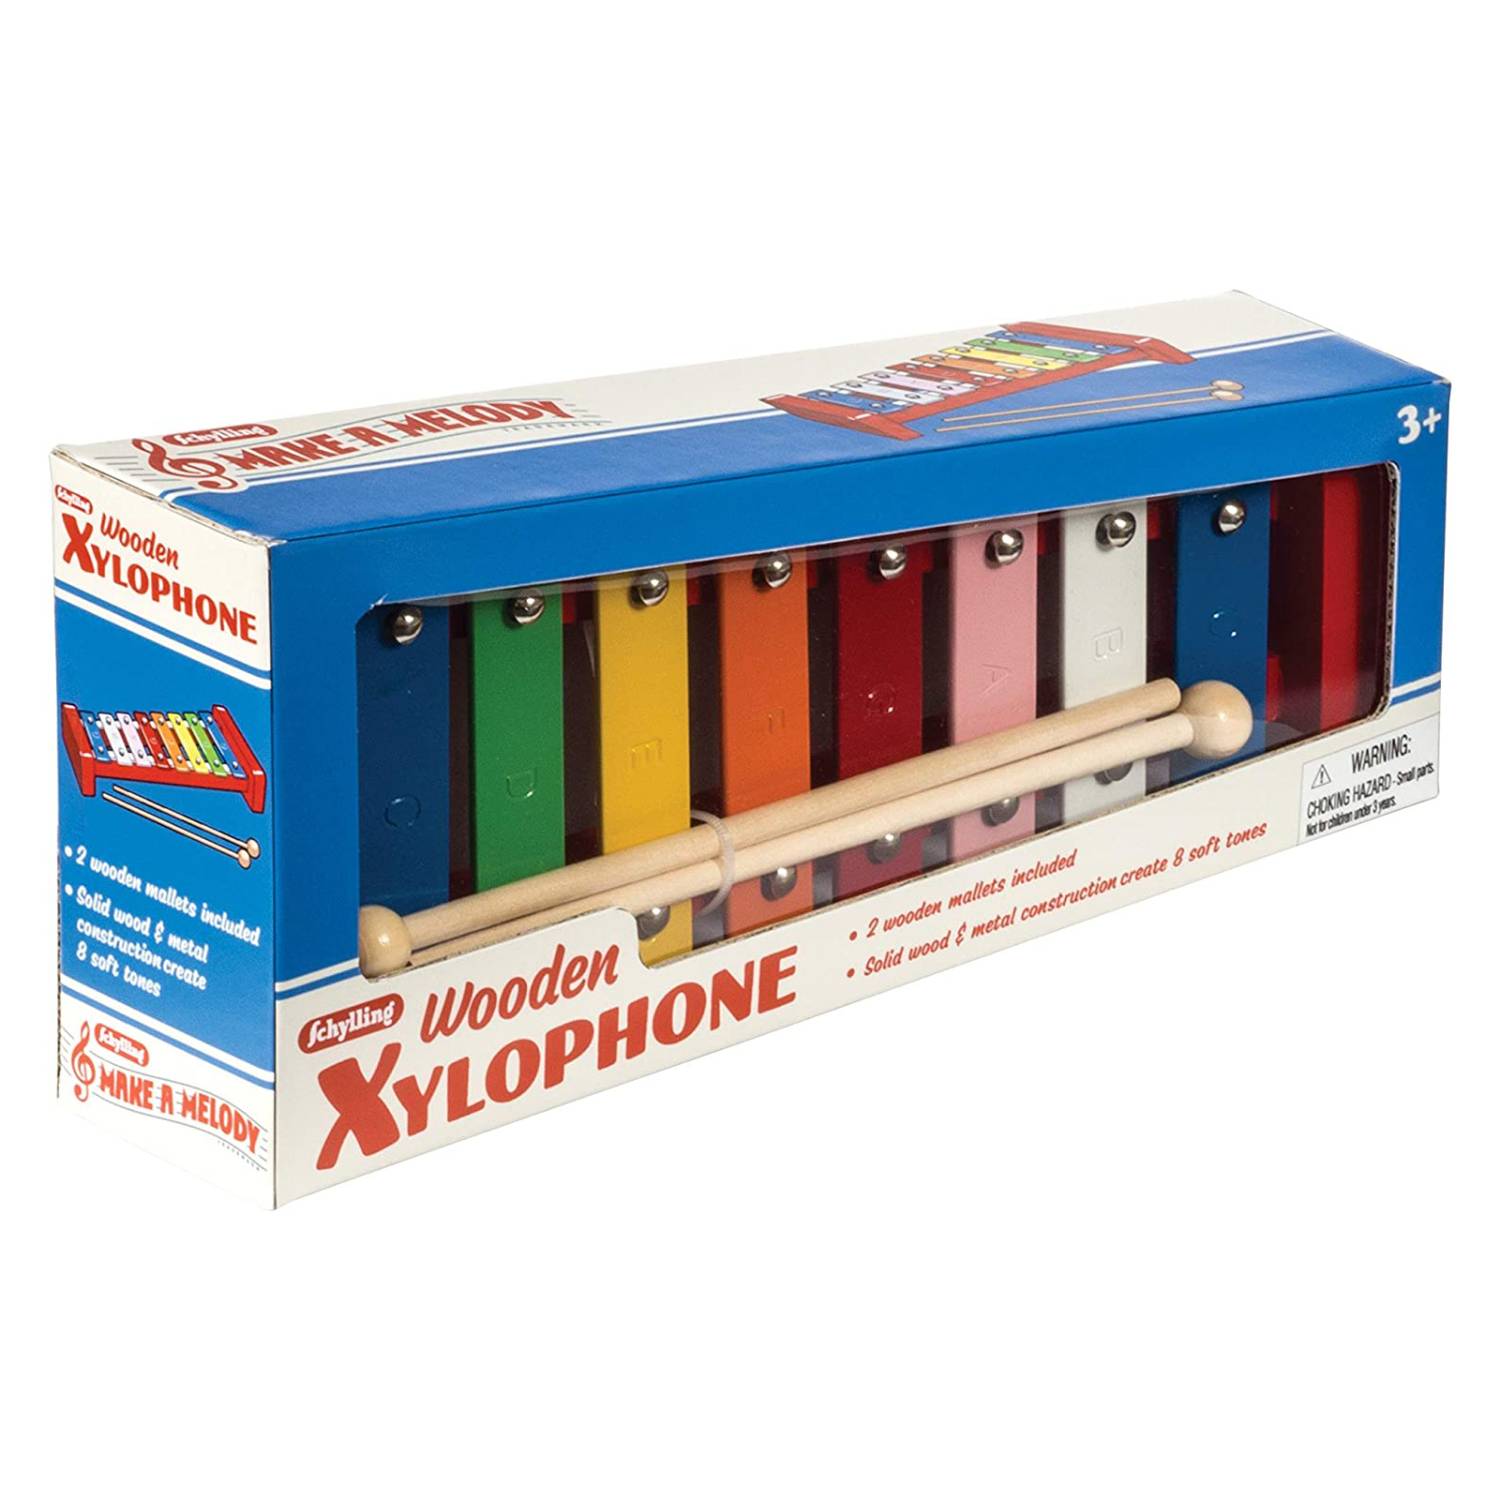 Schylling Wood Xylophone Children's Musical Instrument - image 2 of 3